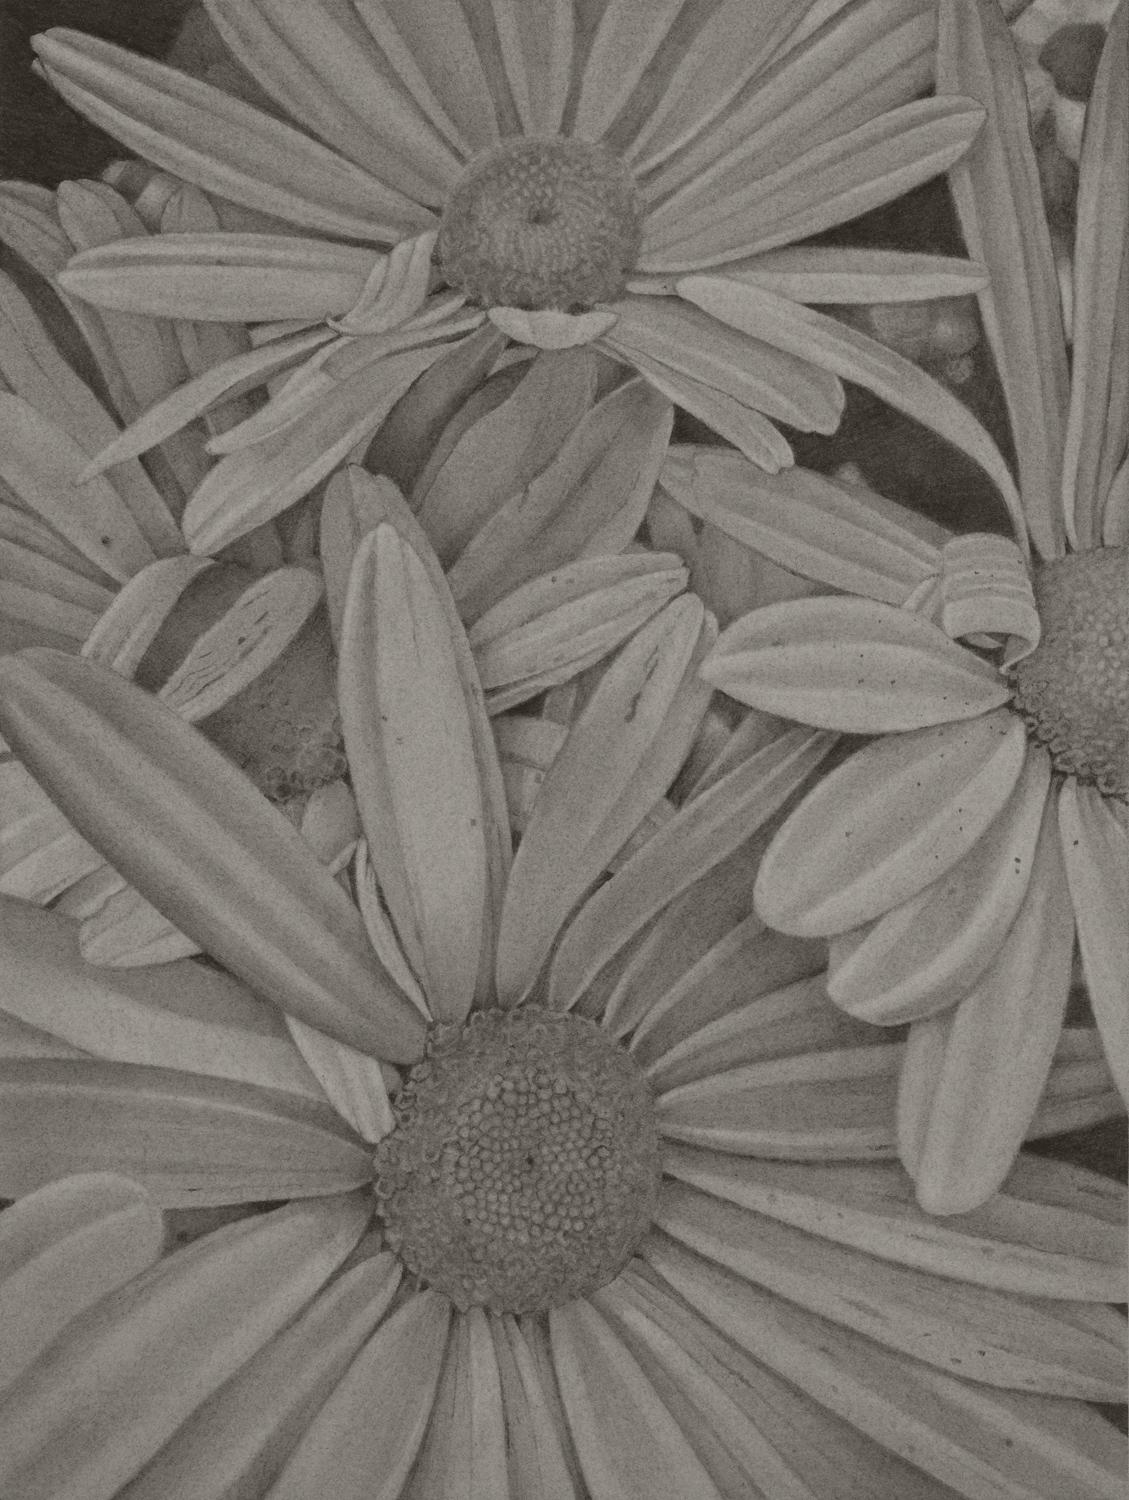 Daisies, grey realist graphite on paper floral drawing, 2020